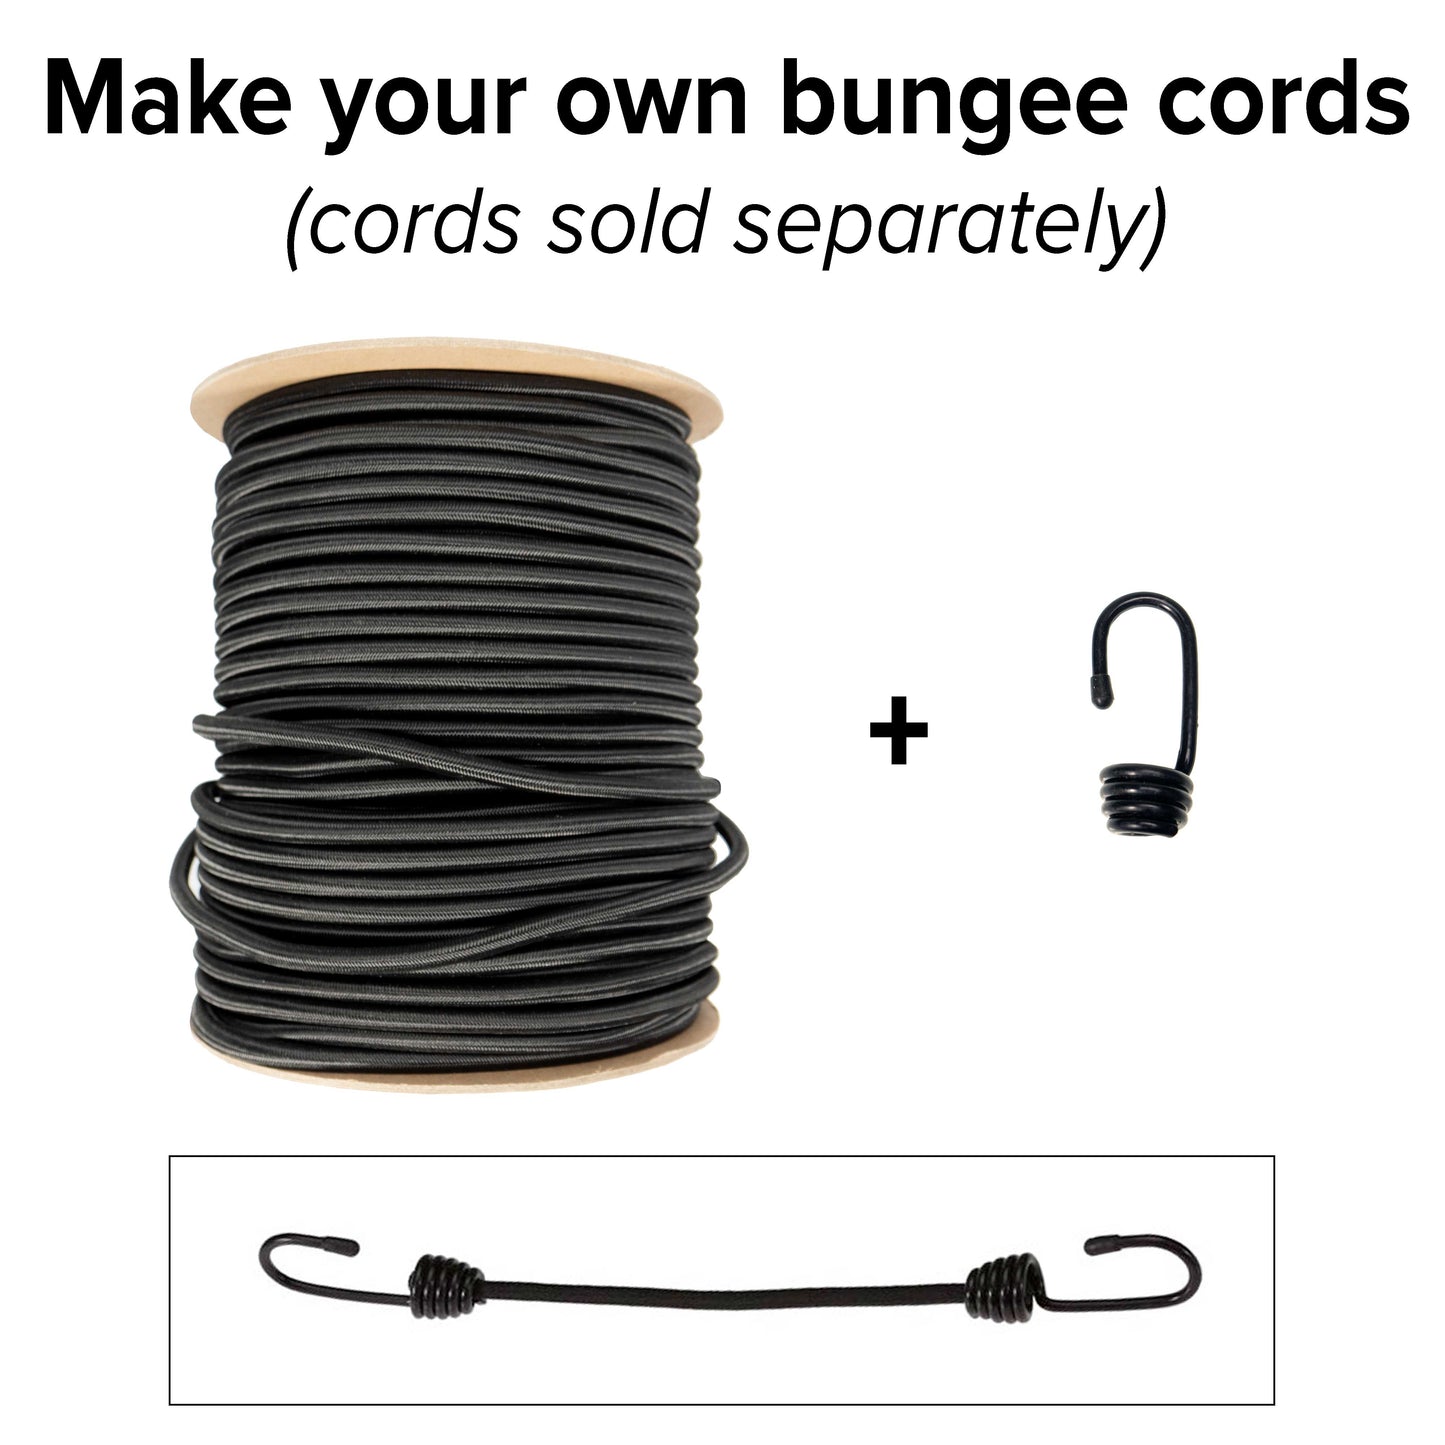 38 foot foot9mm Black Polyester Shock Cord 100 ft image 1 of 6 image 2 of 6 image 3 of 6 image 4 of 6 image 5 of 6